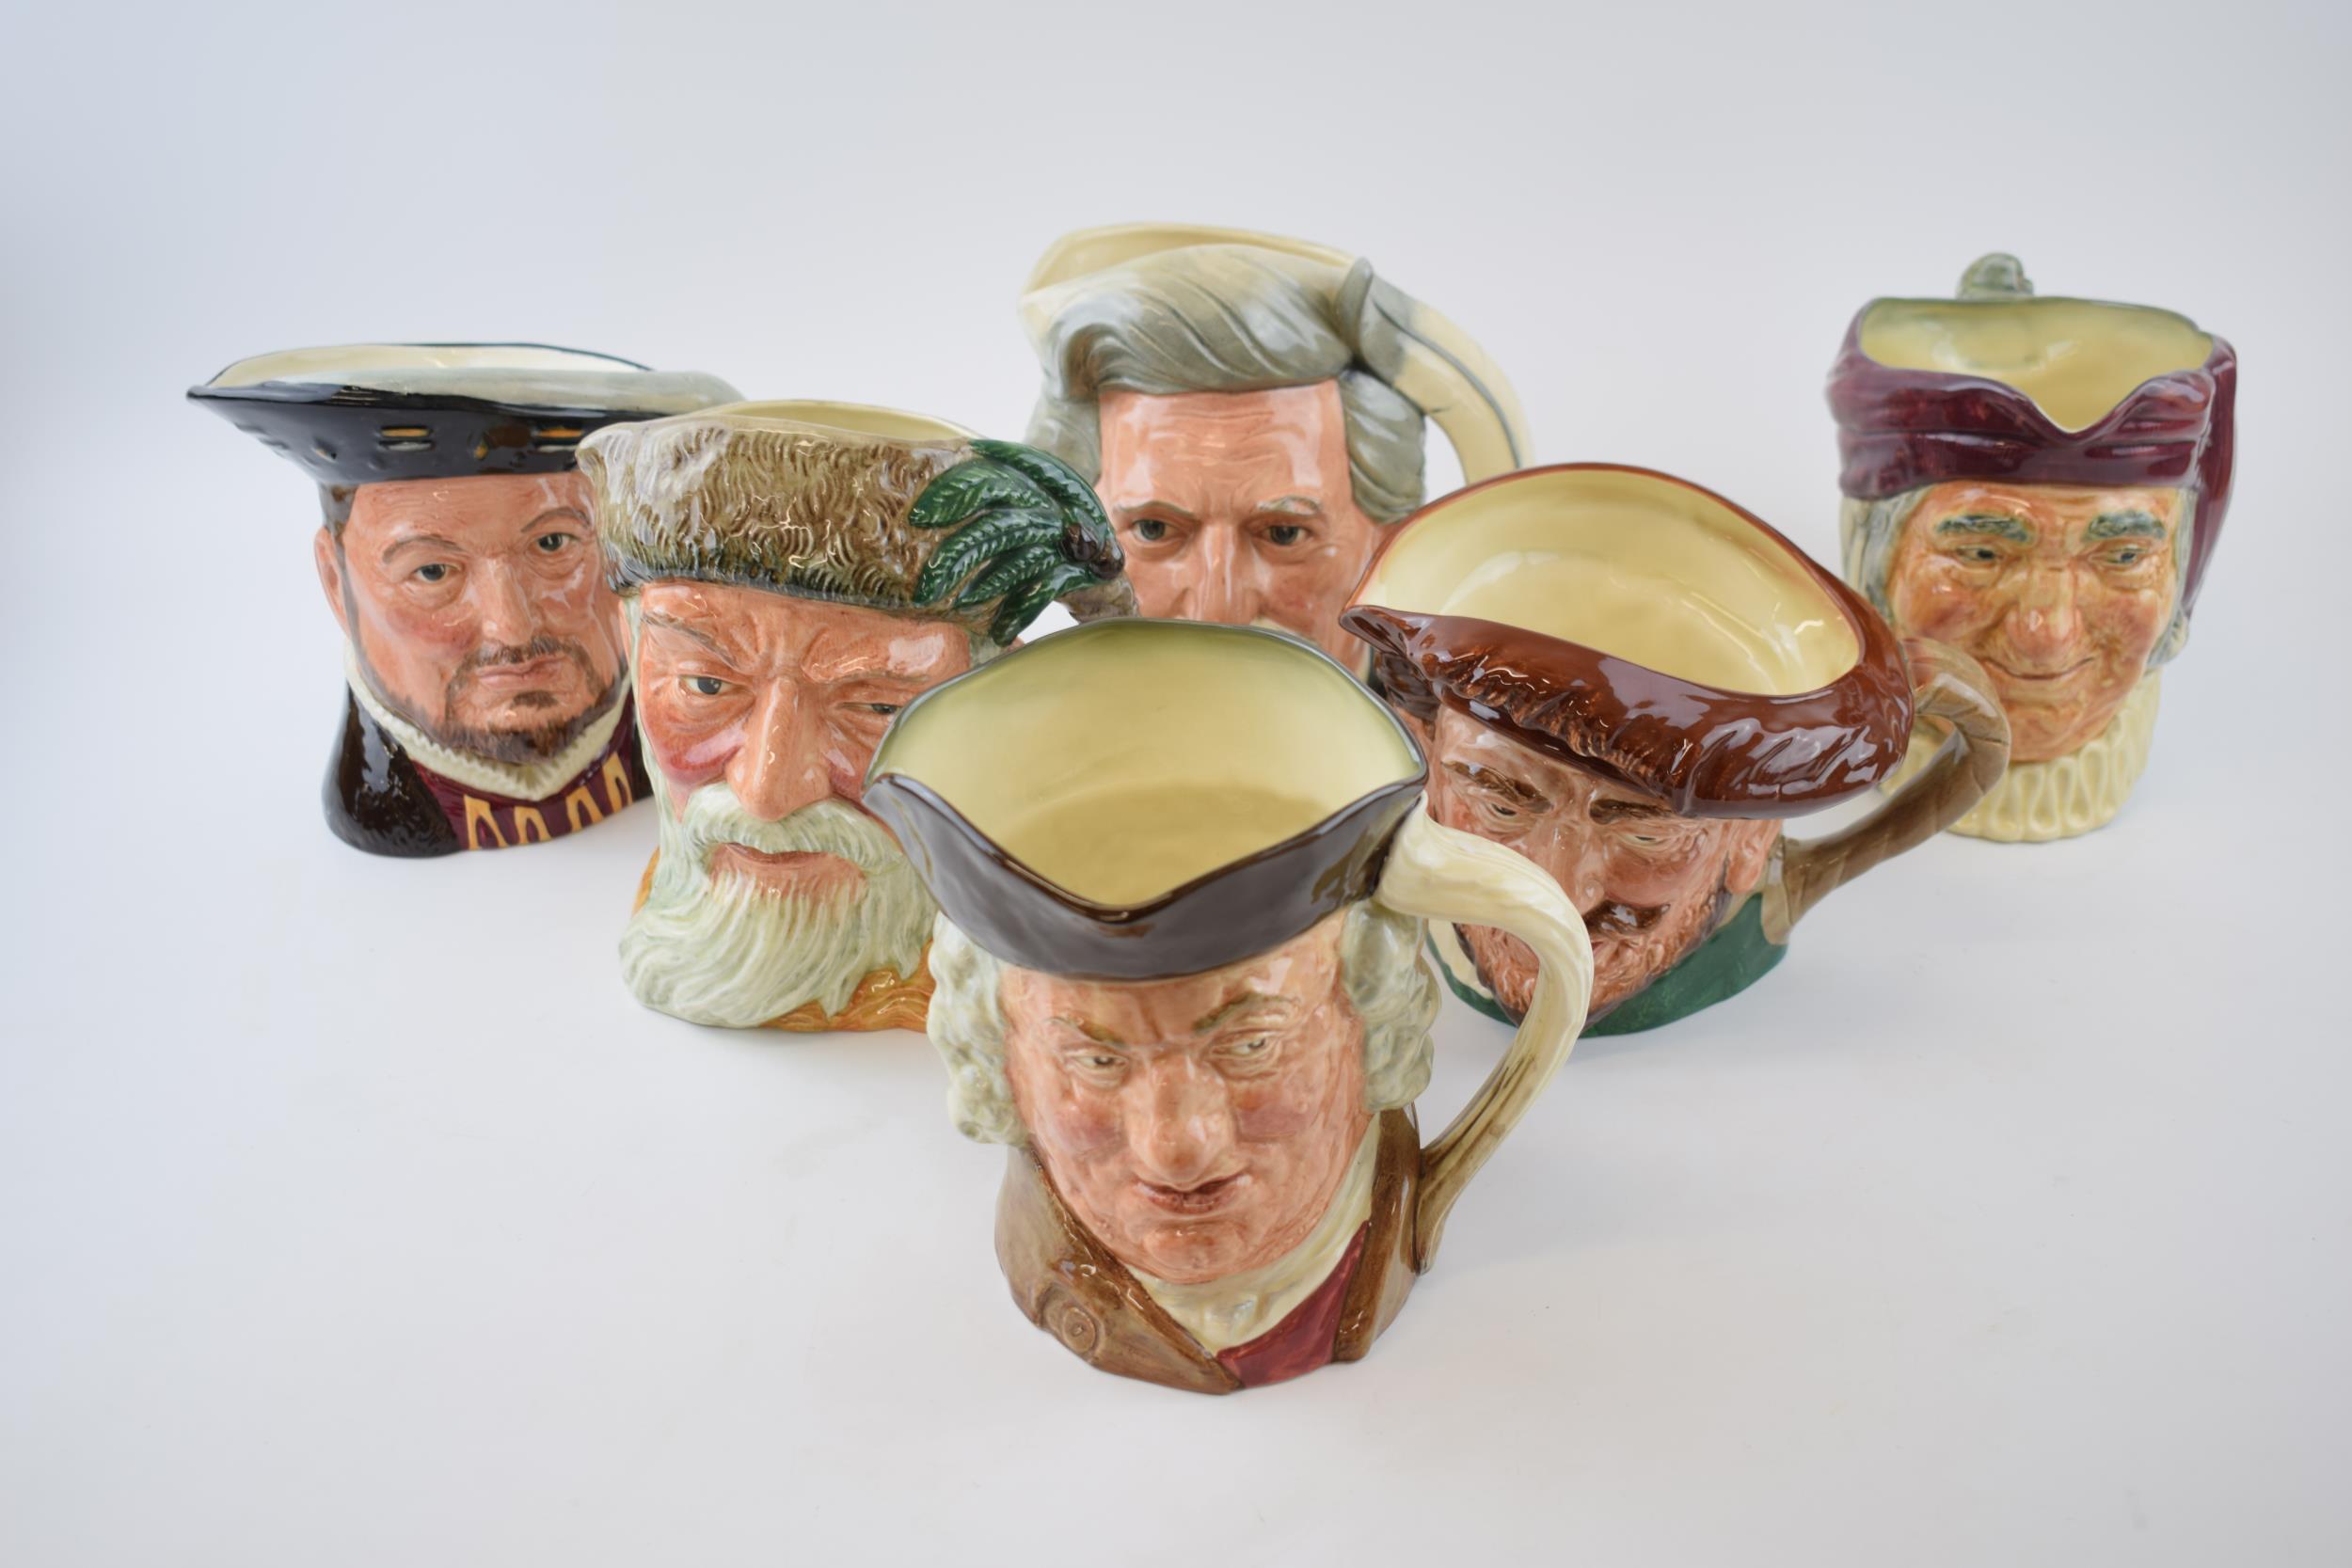 Large Royal Doulton character jugs to include Sam Johnson, Henry VIII, Robinson Crusoe and others (